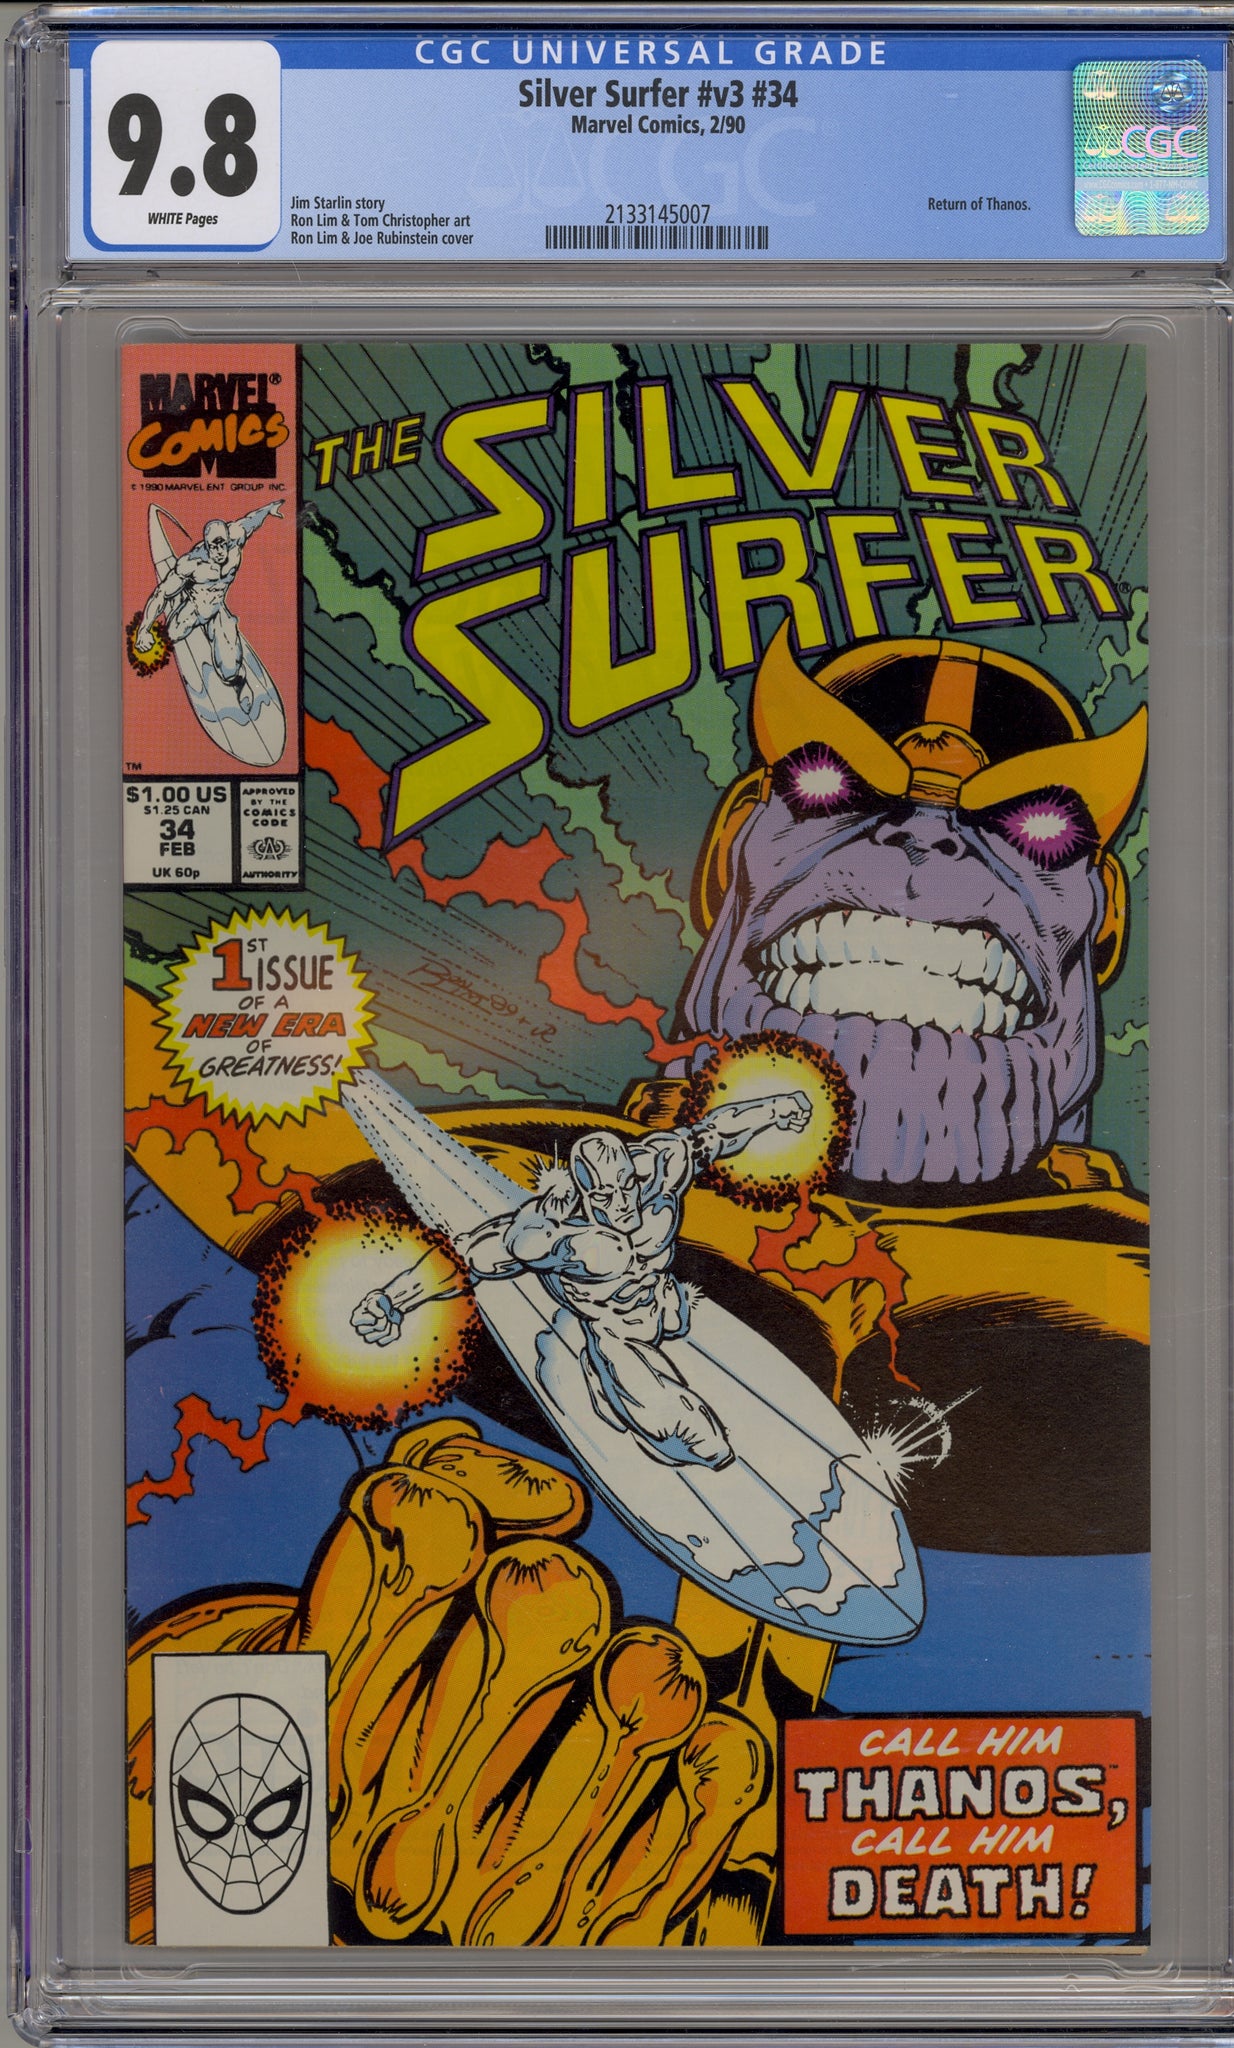 Silver Surfer, The #34 (1990)  Thanos